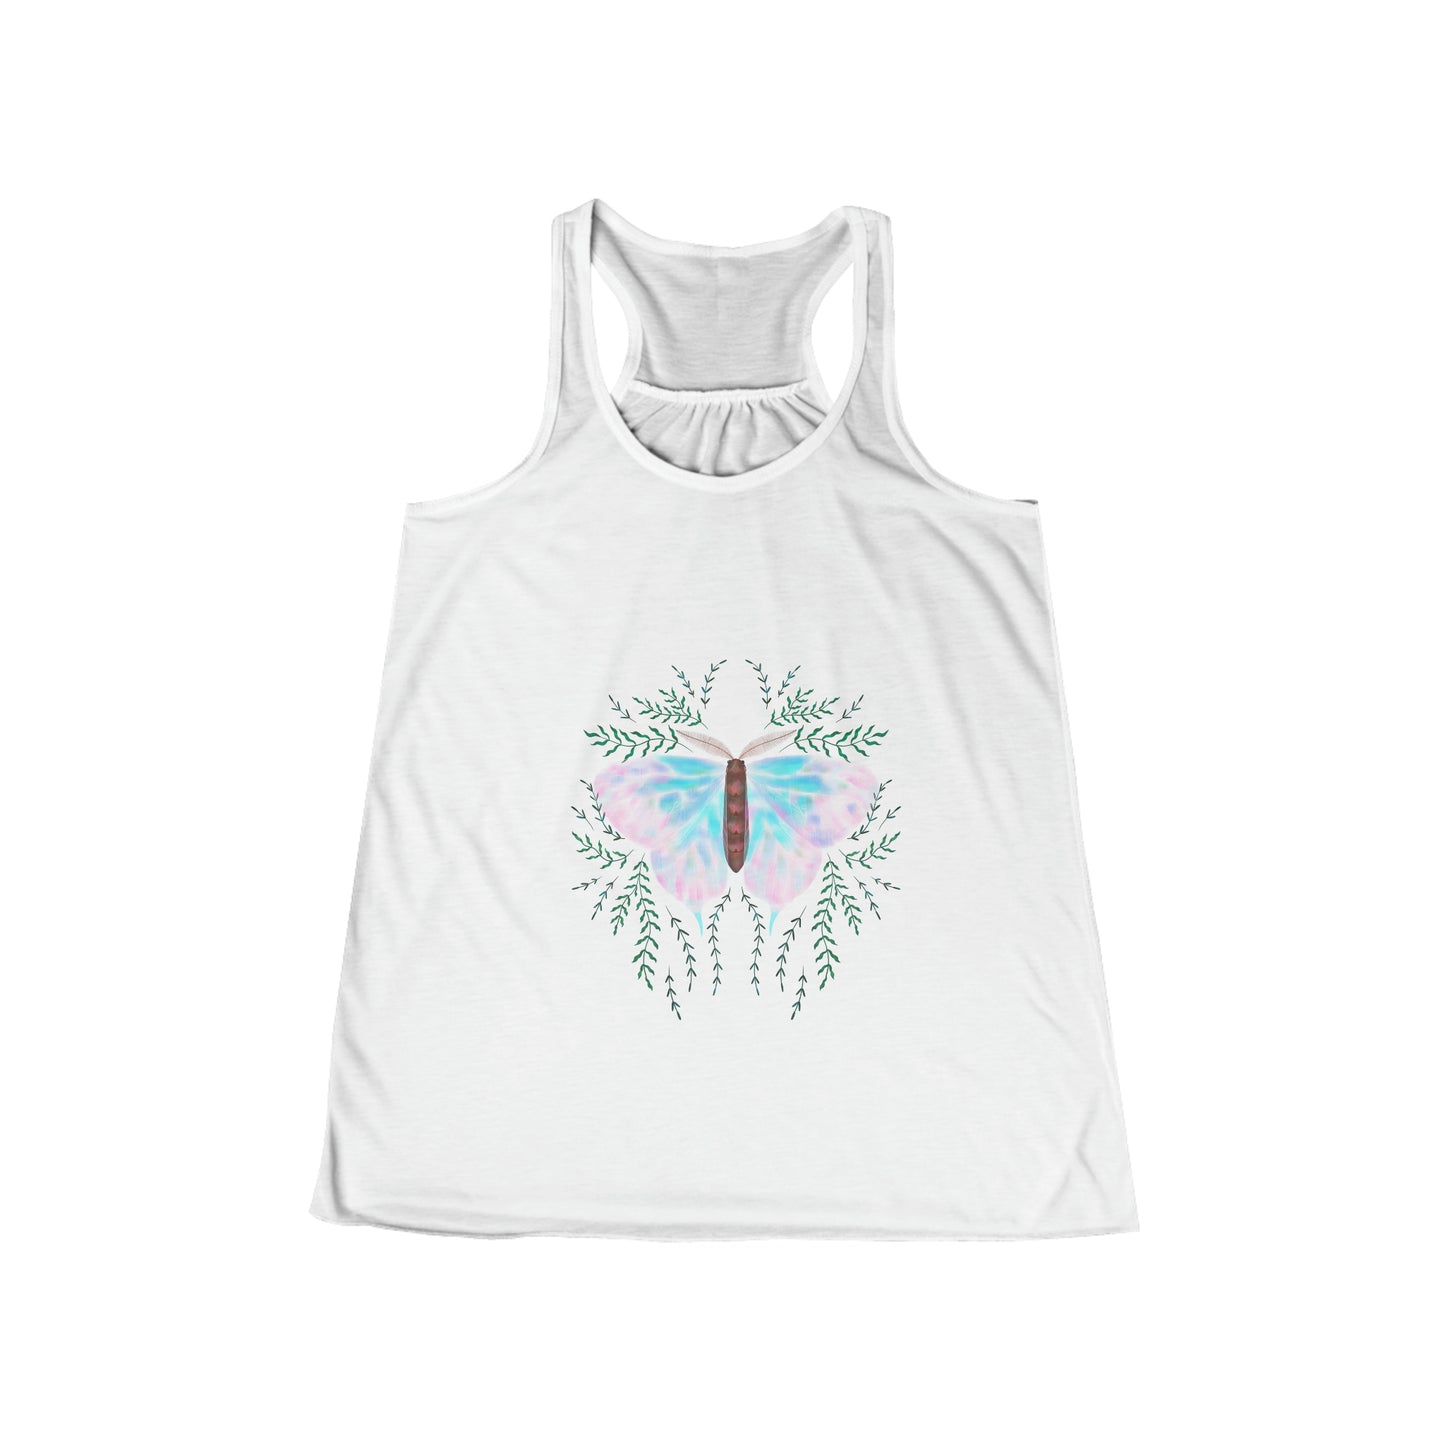 Racerback tee with Sober Mom but Still Sassy Butterfly original Design by Saffy Baldwin. 